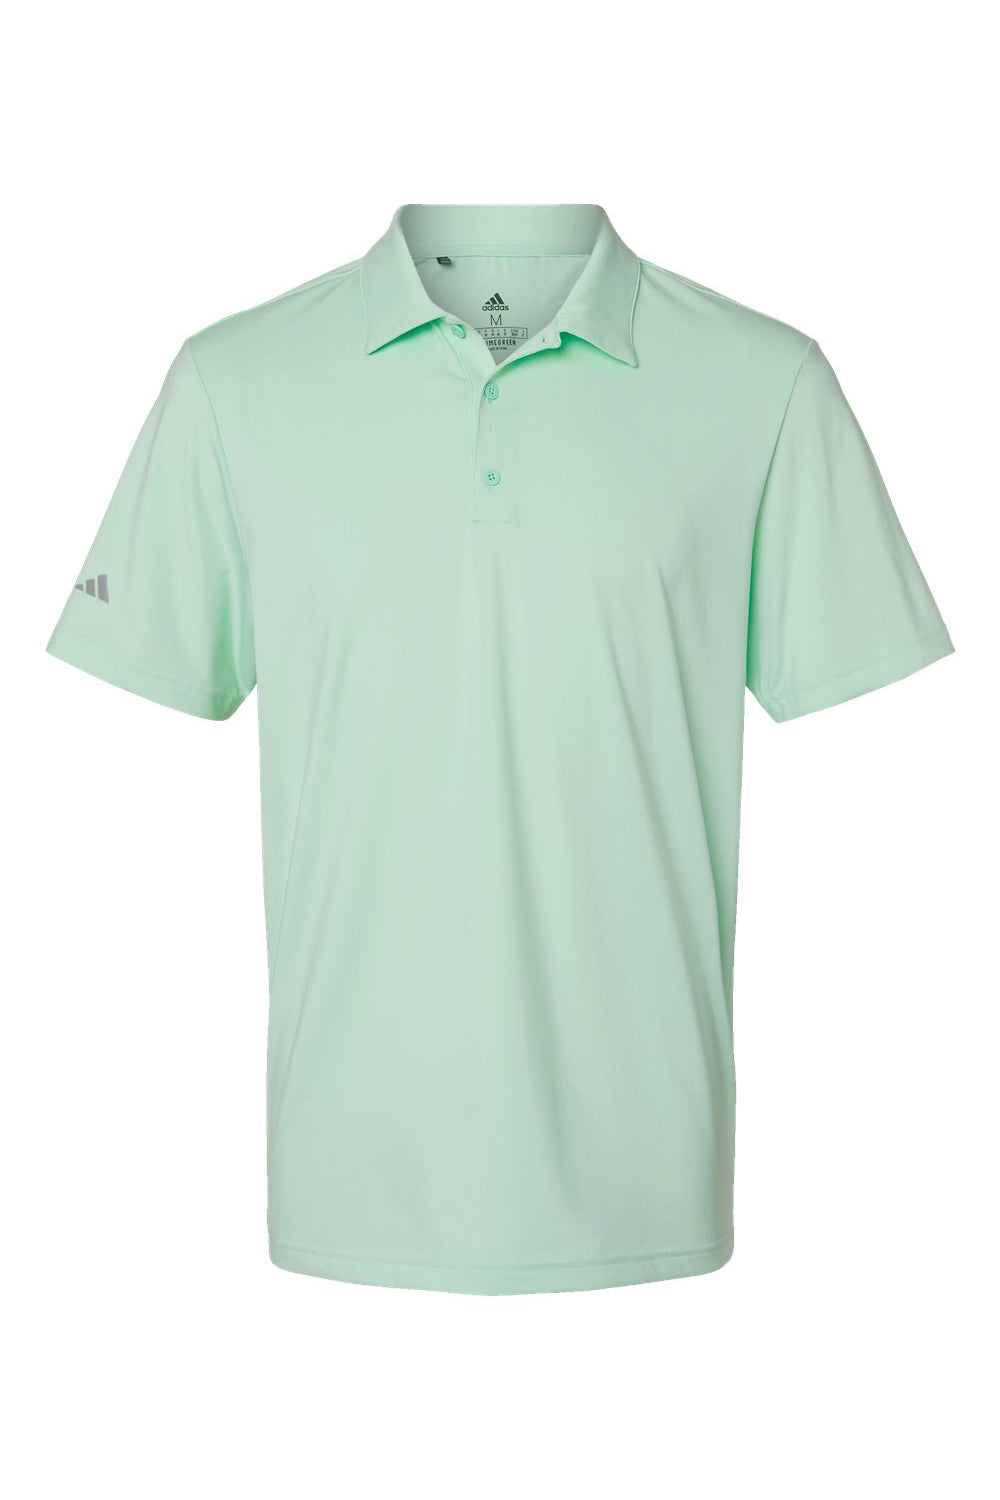 Adidas A514 Mens Ultimate Short Sleeve Polo Shirt Clear Mint Flat Front